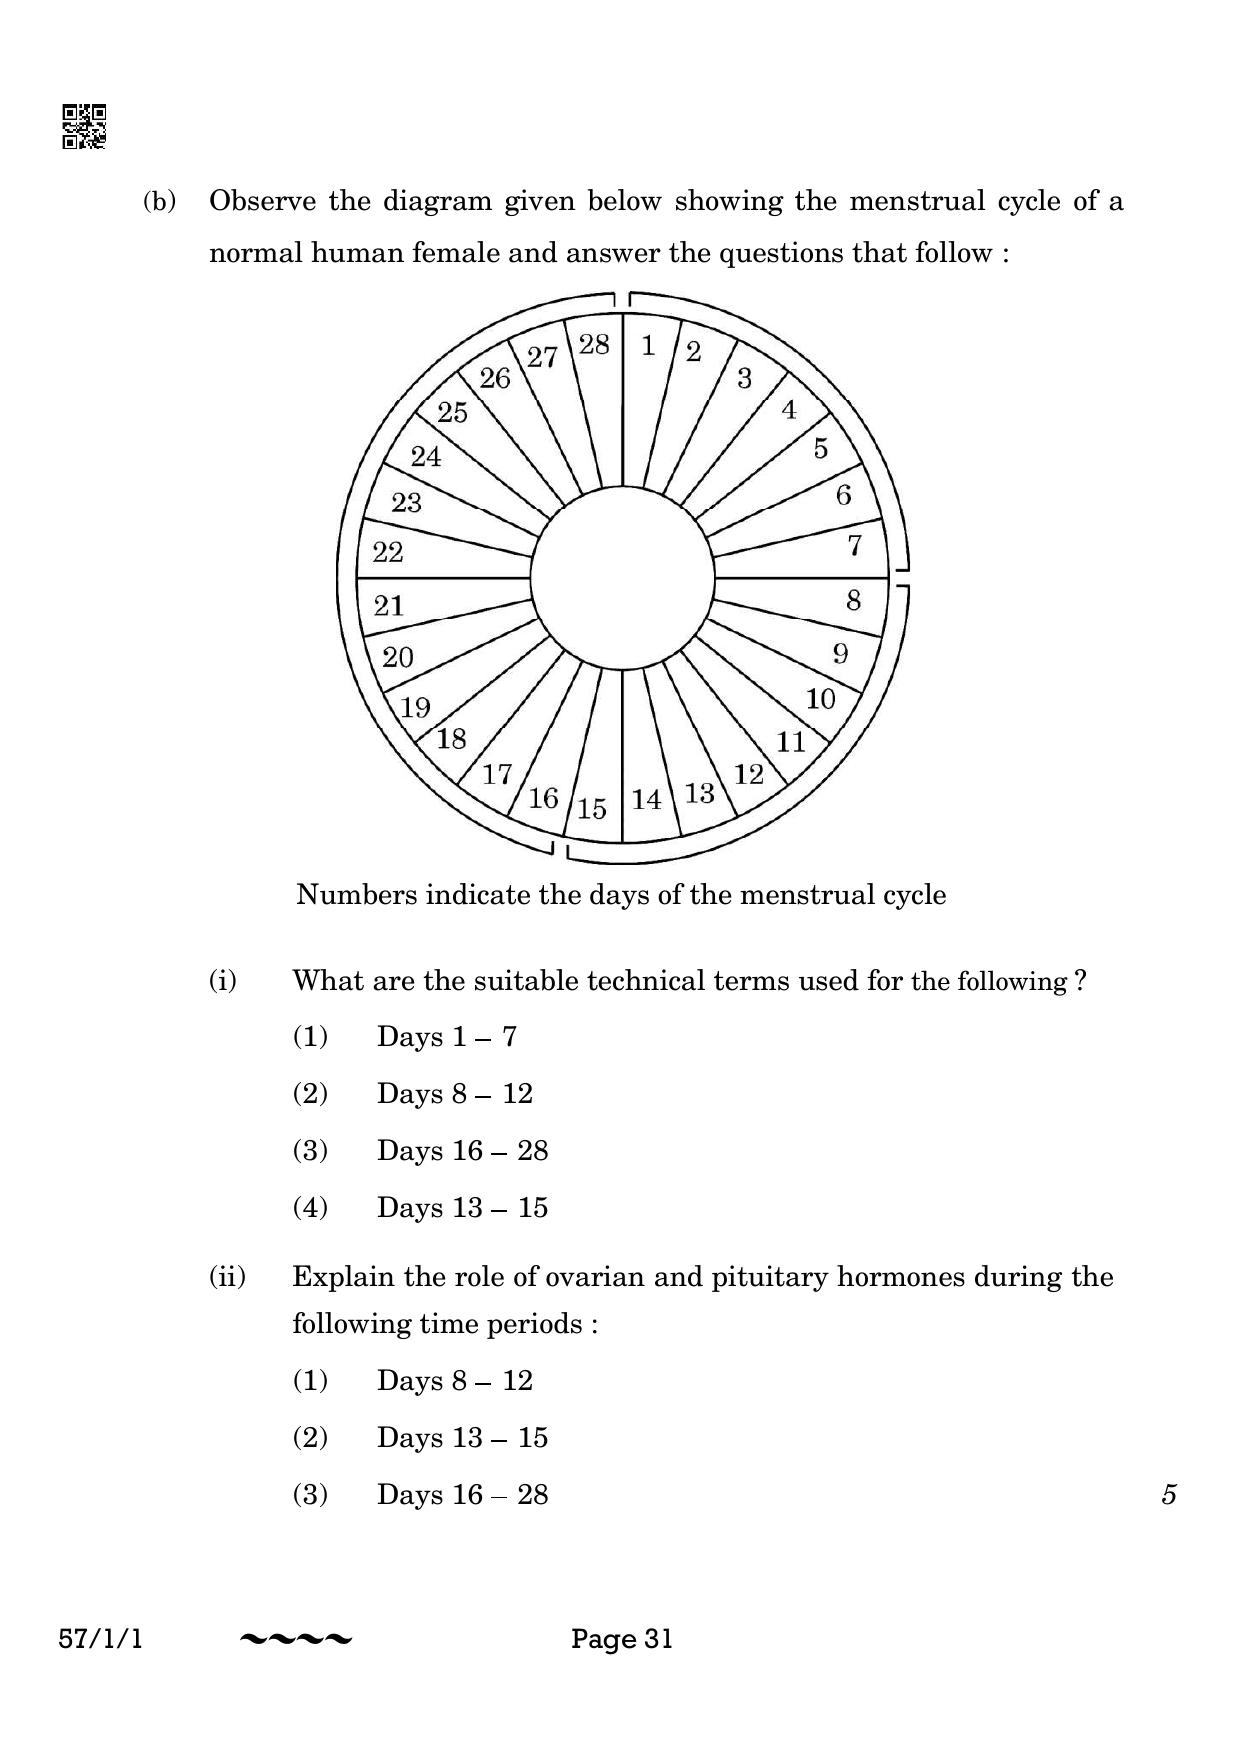 CBSE Class 12 57-1-1 Biology 2023 Question Paper - Page 31